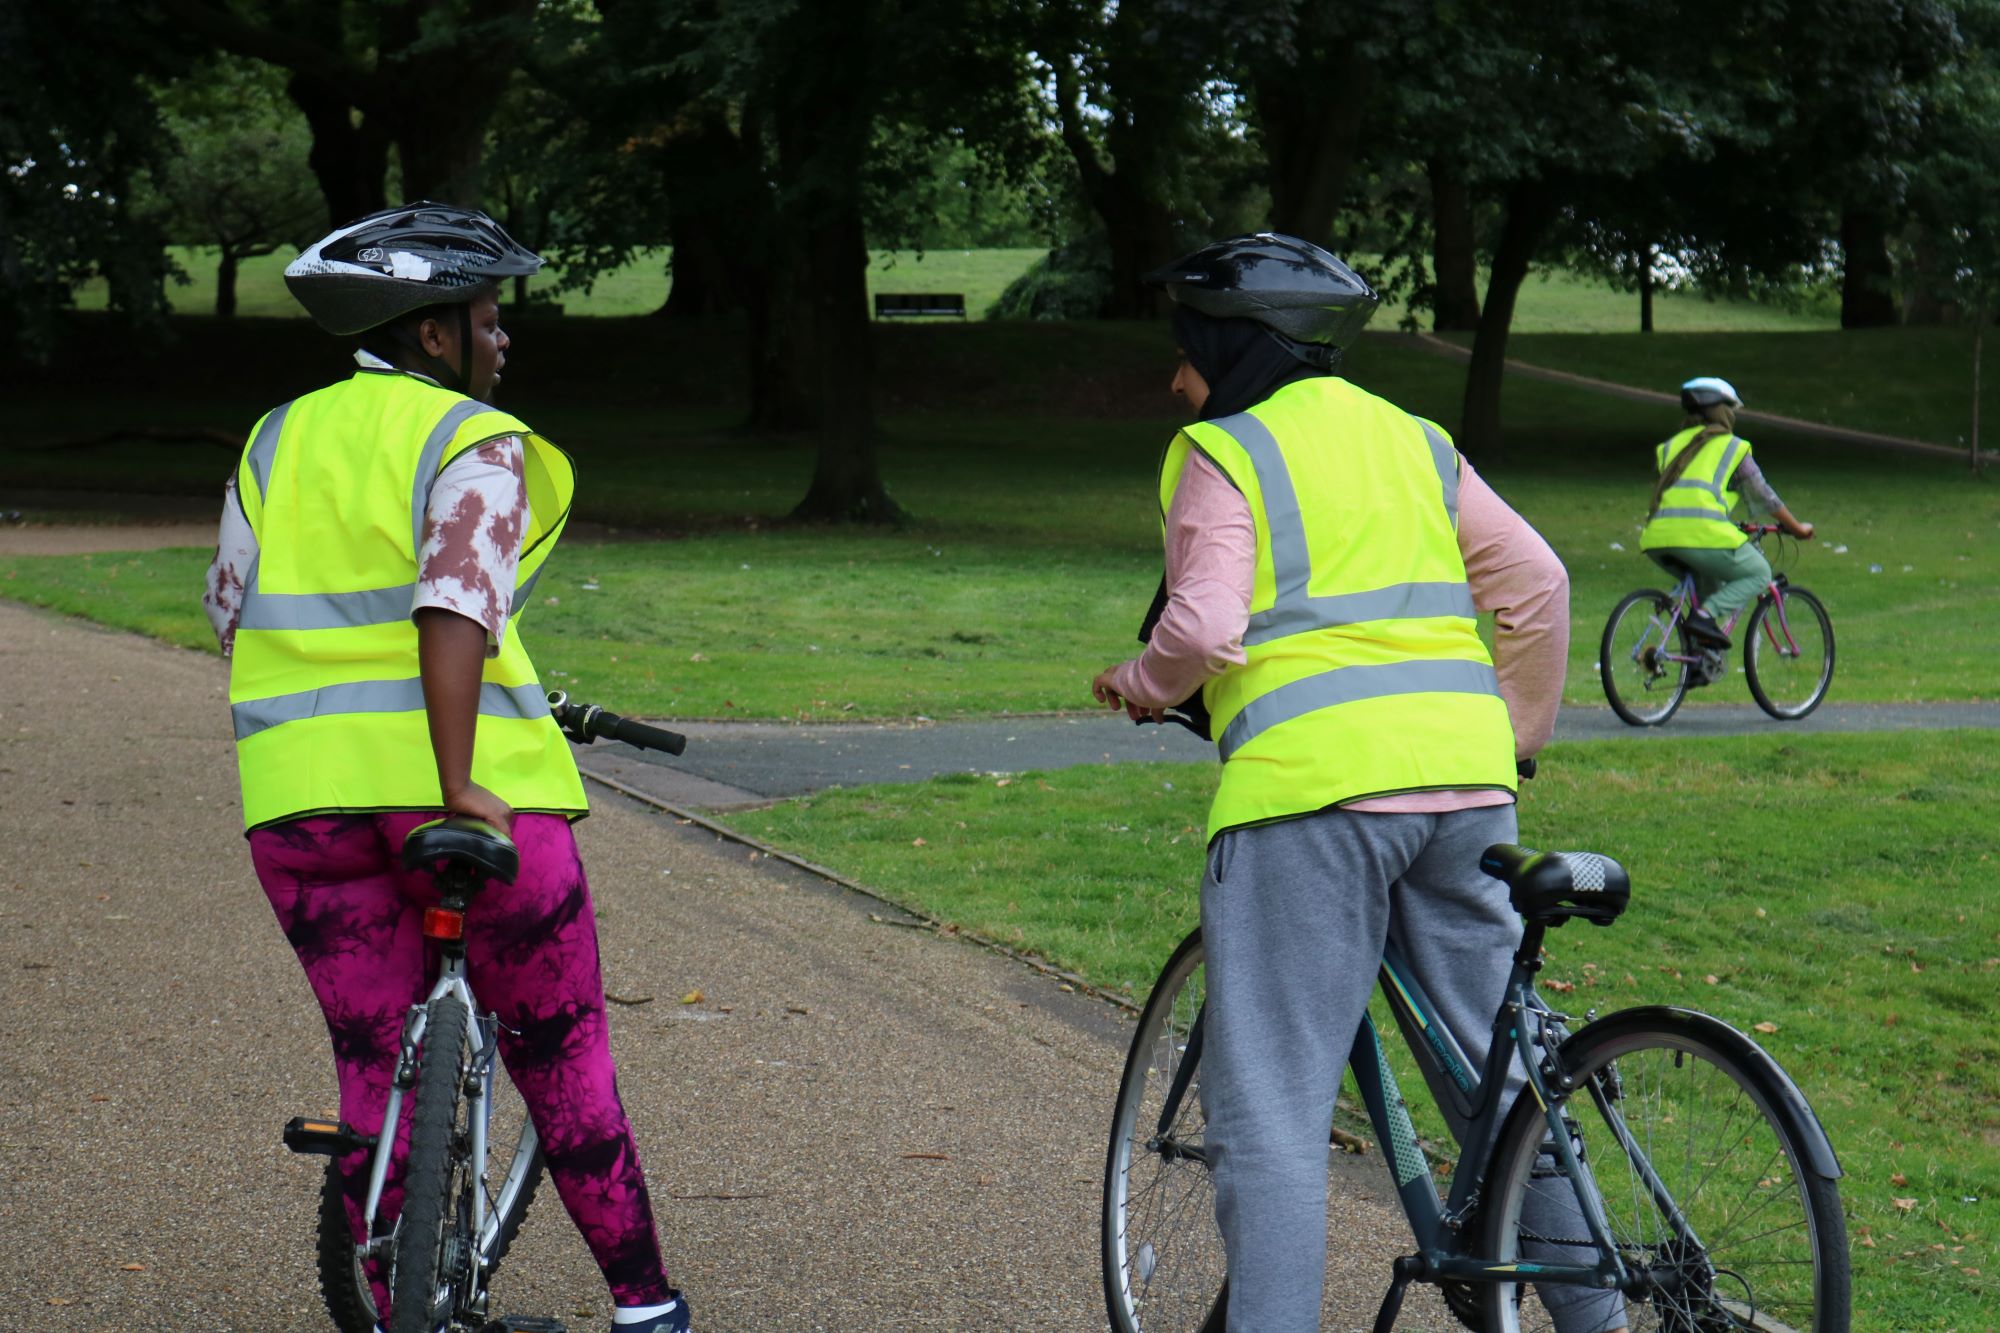 Two women in hi-vis jackets on cycles in a park. They are facing away from the camera